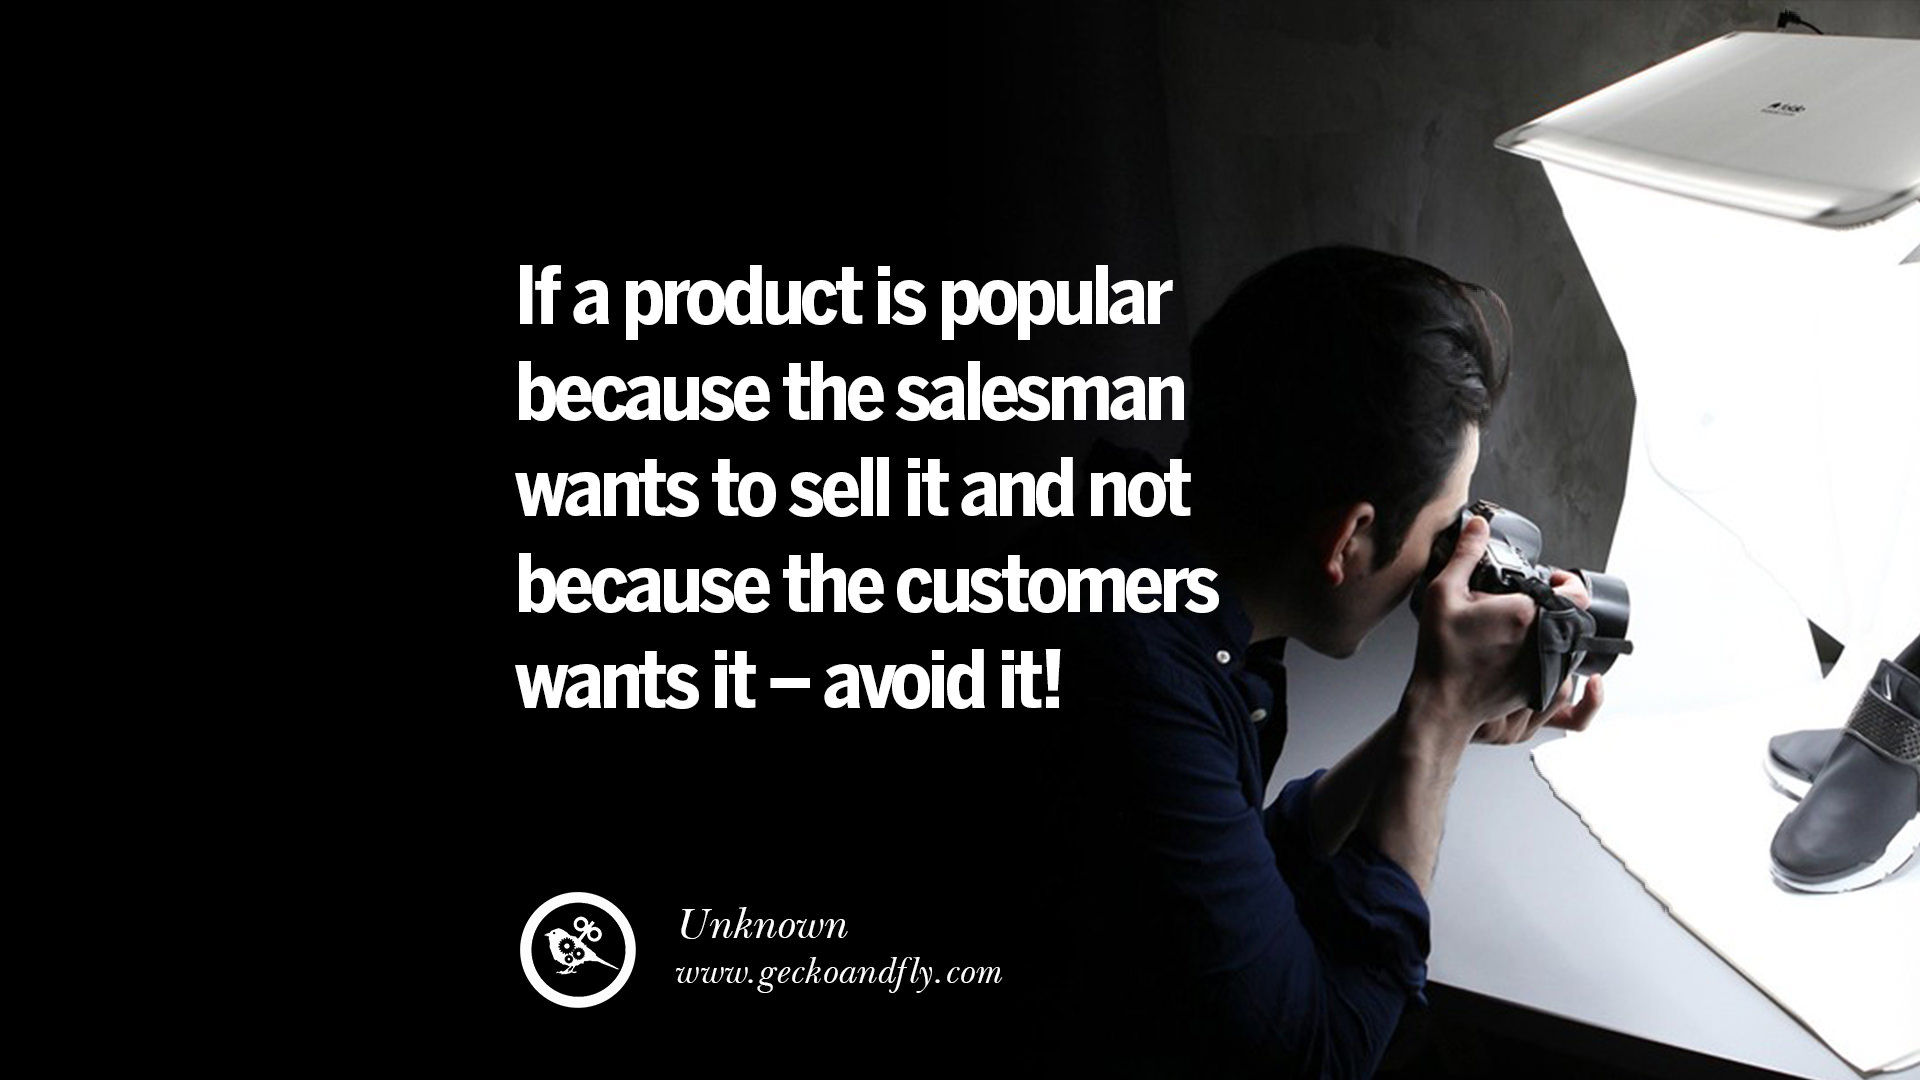 sales-quotes-mlm-direct-selling-amway-he